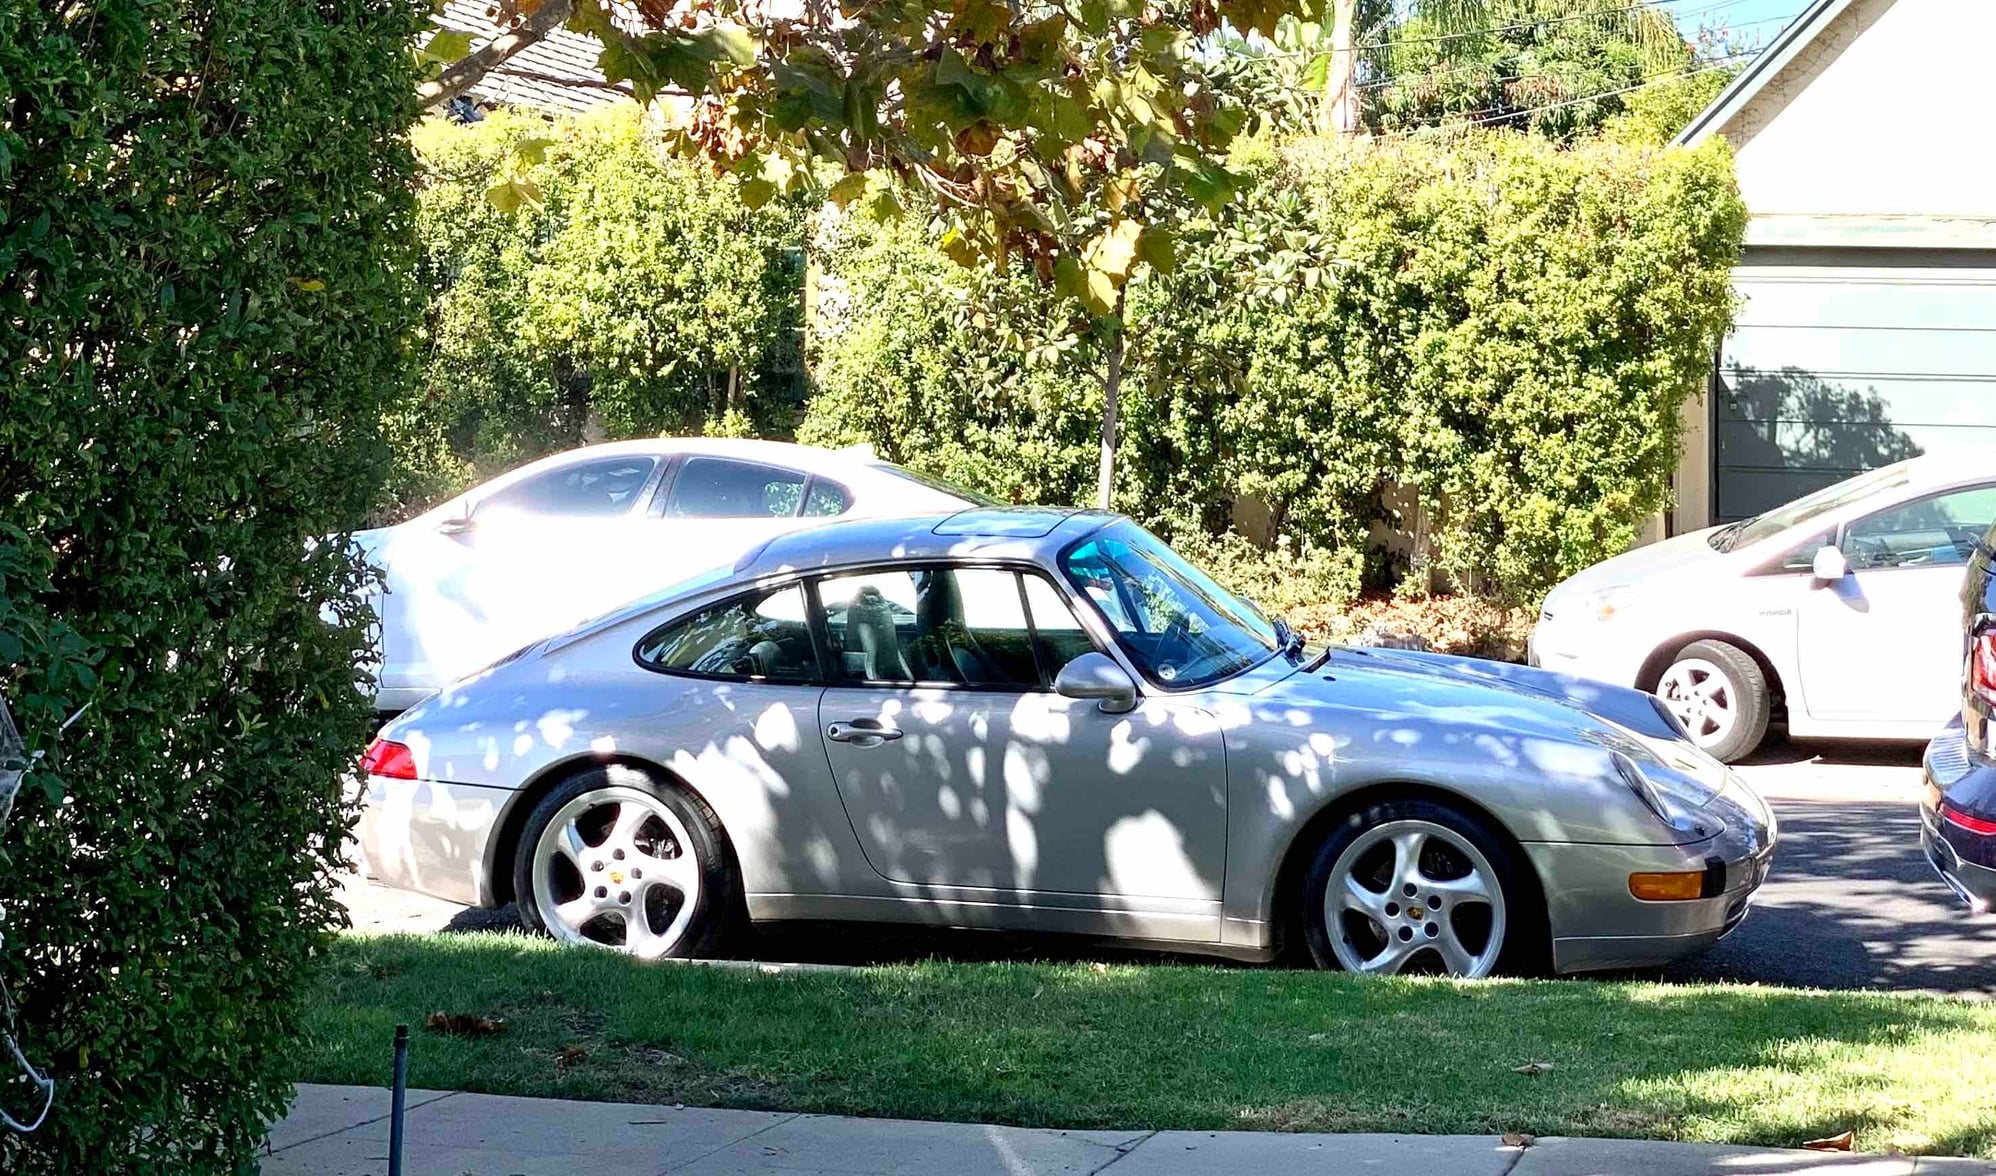 Wheels and Tires/Axles - 18" Turbo Twist look Mille Miglia in 9.9/10 condition, LA pick up - Used - 1995 to 2004 Porsche 911 - Los Angeles, CA 90280, United States